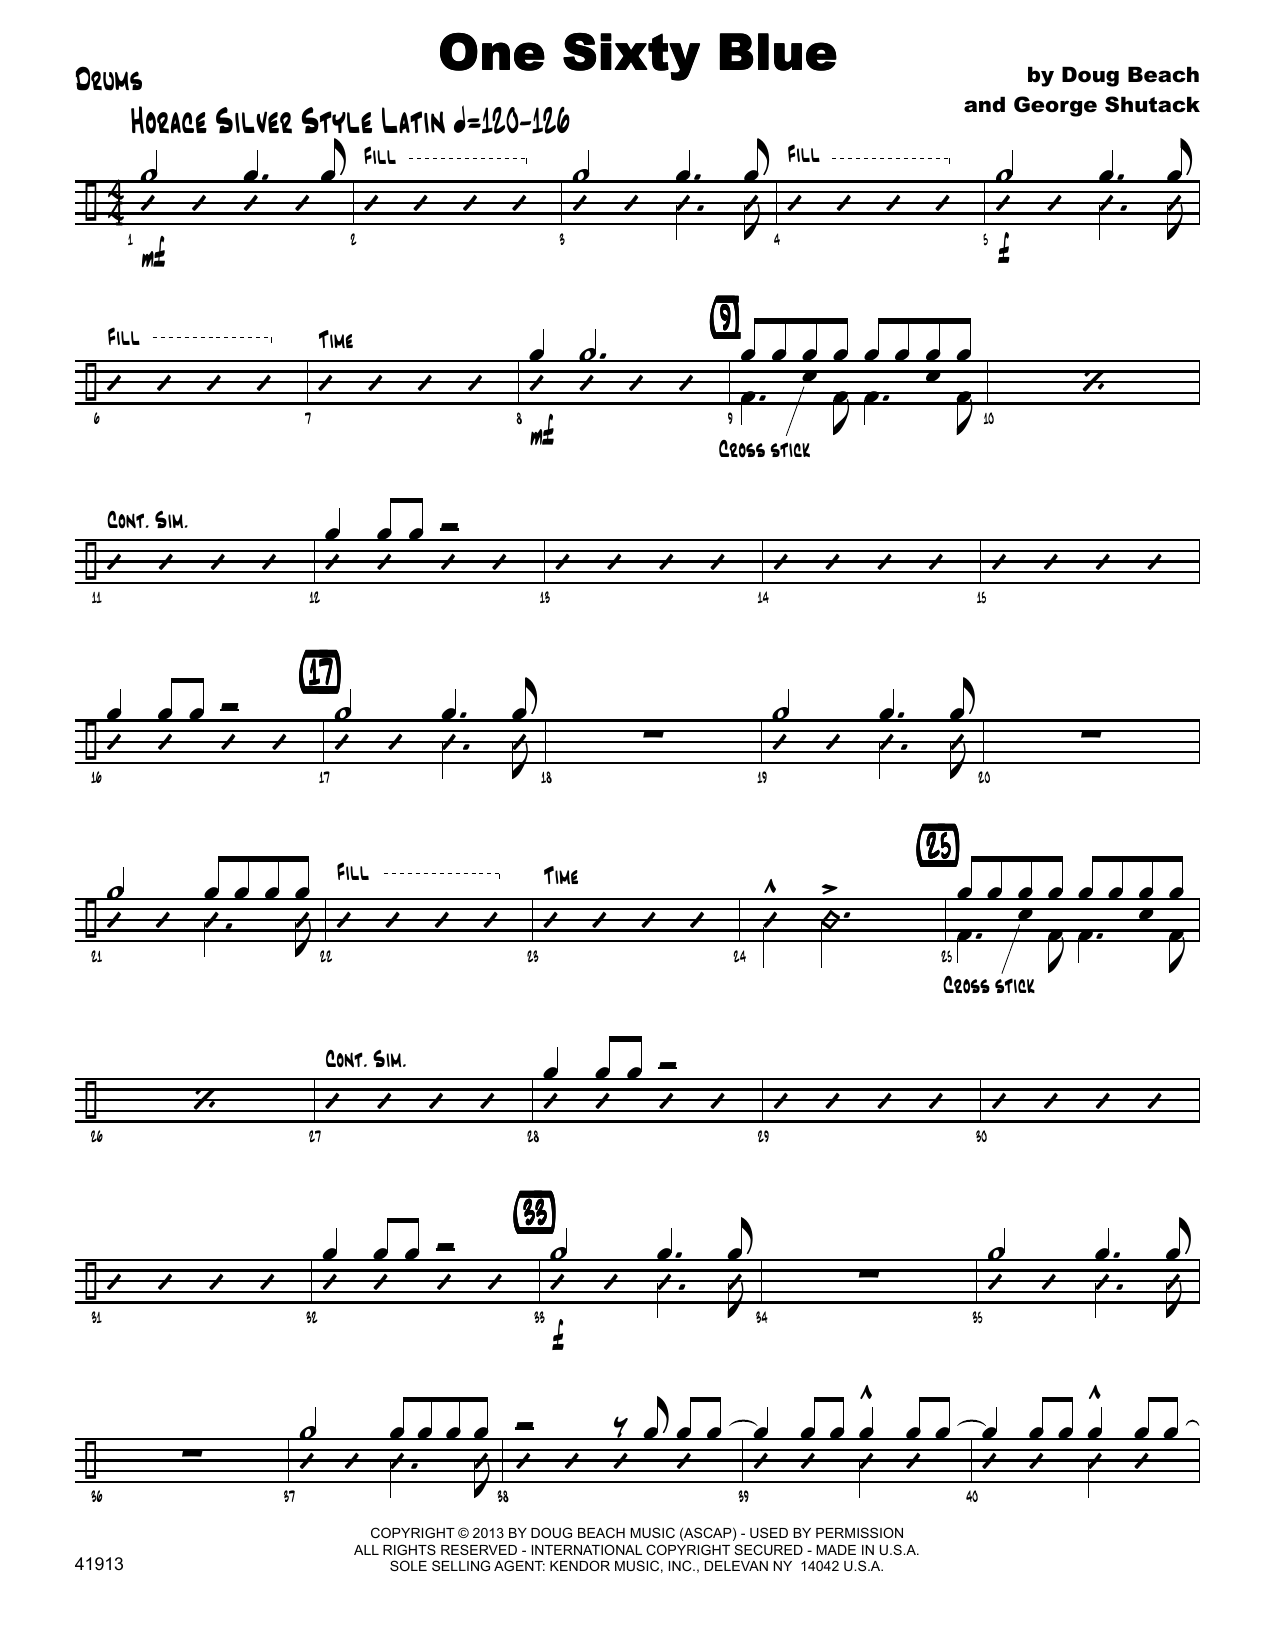 Download Doug Beach One Sixty Blue - Drums Sheet Music